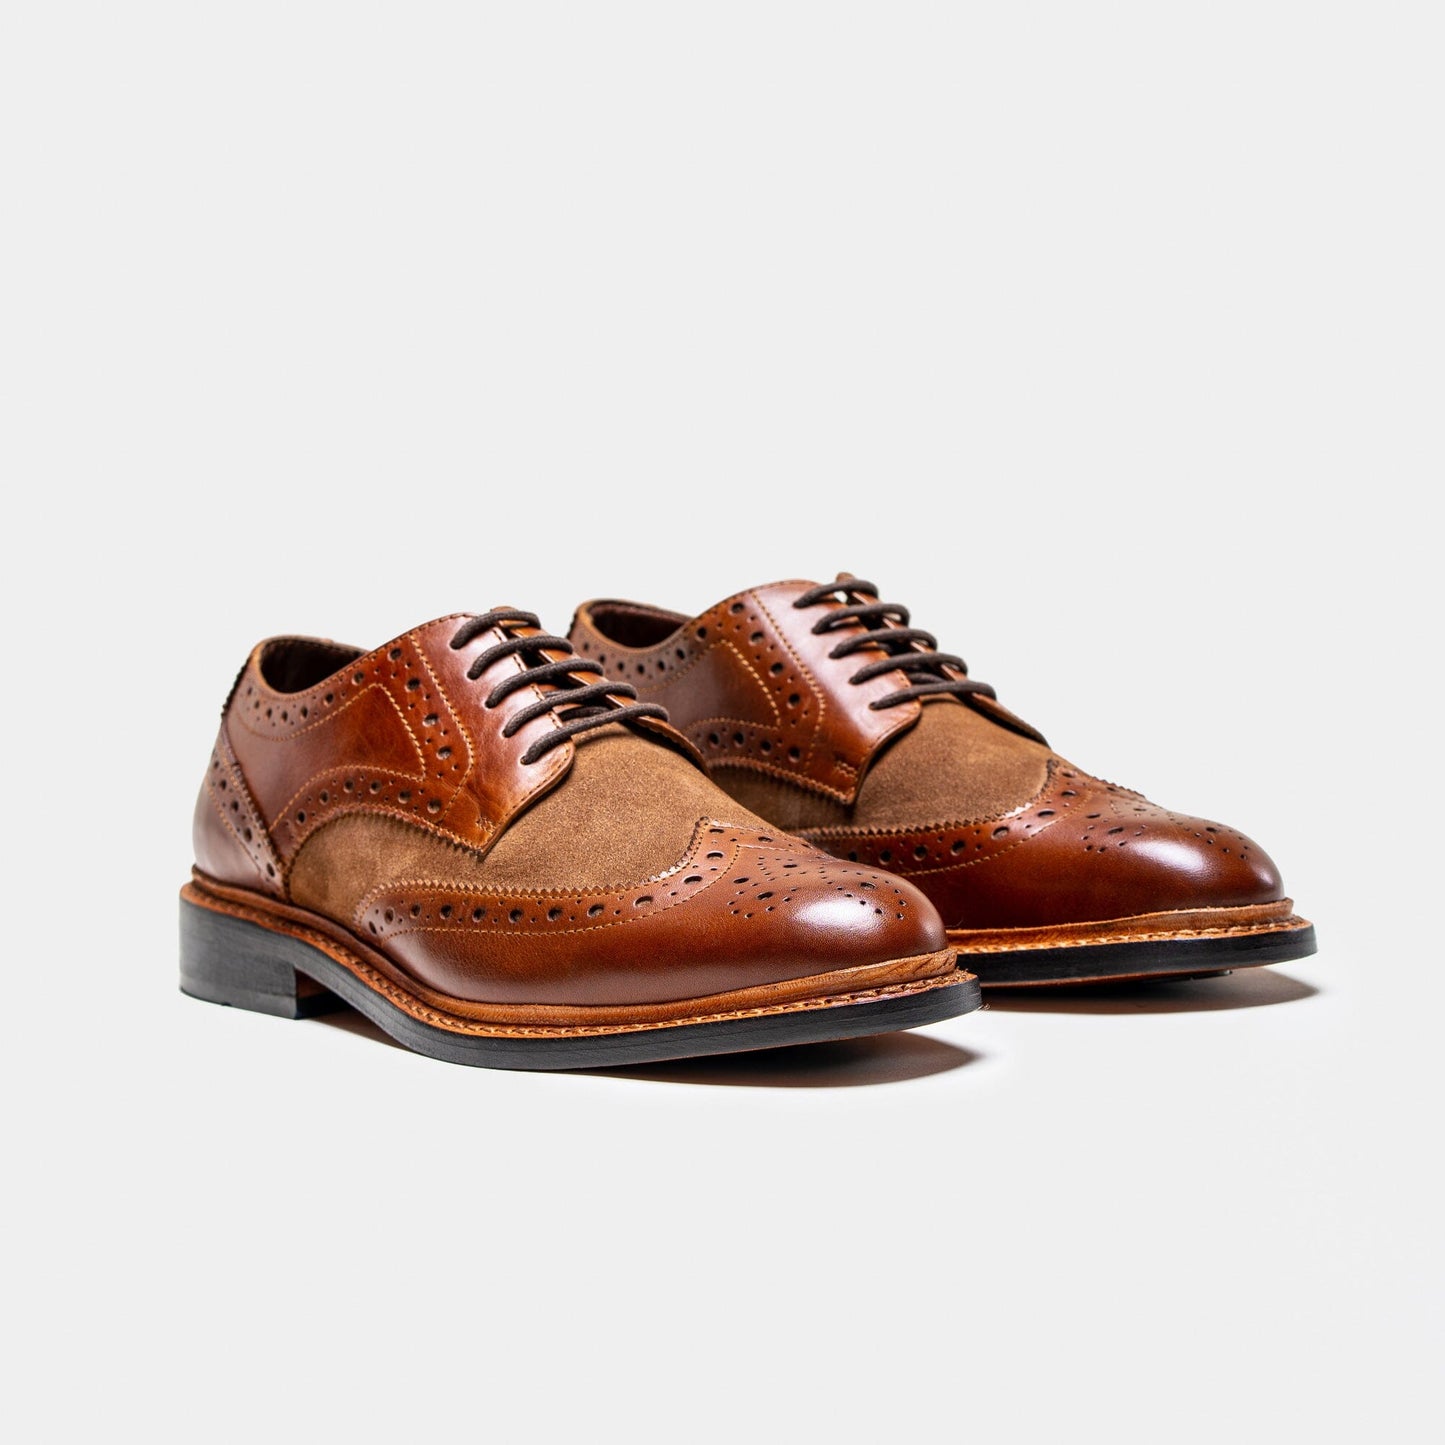 Merton Tan & Suede Shoes - Shoes - - THREADPEPPER